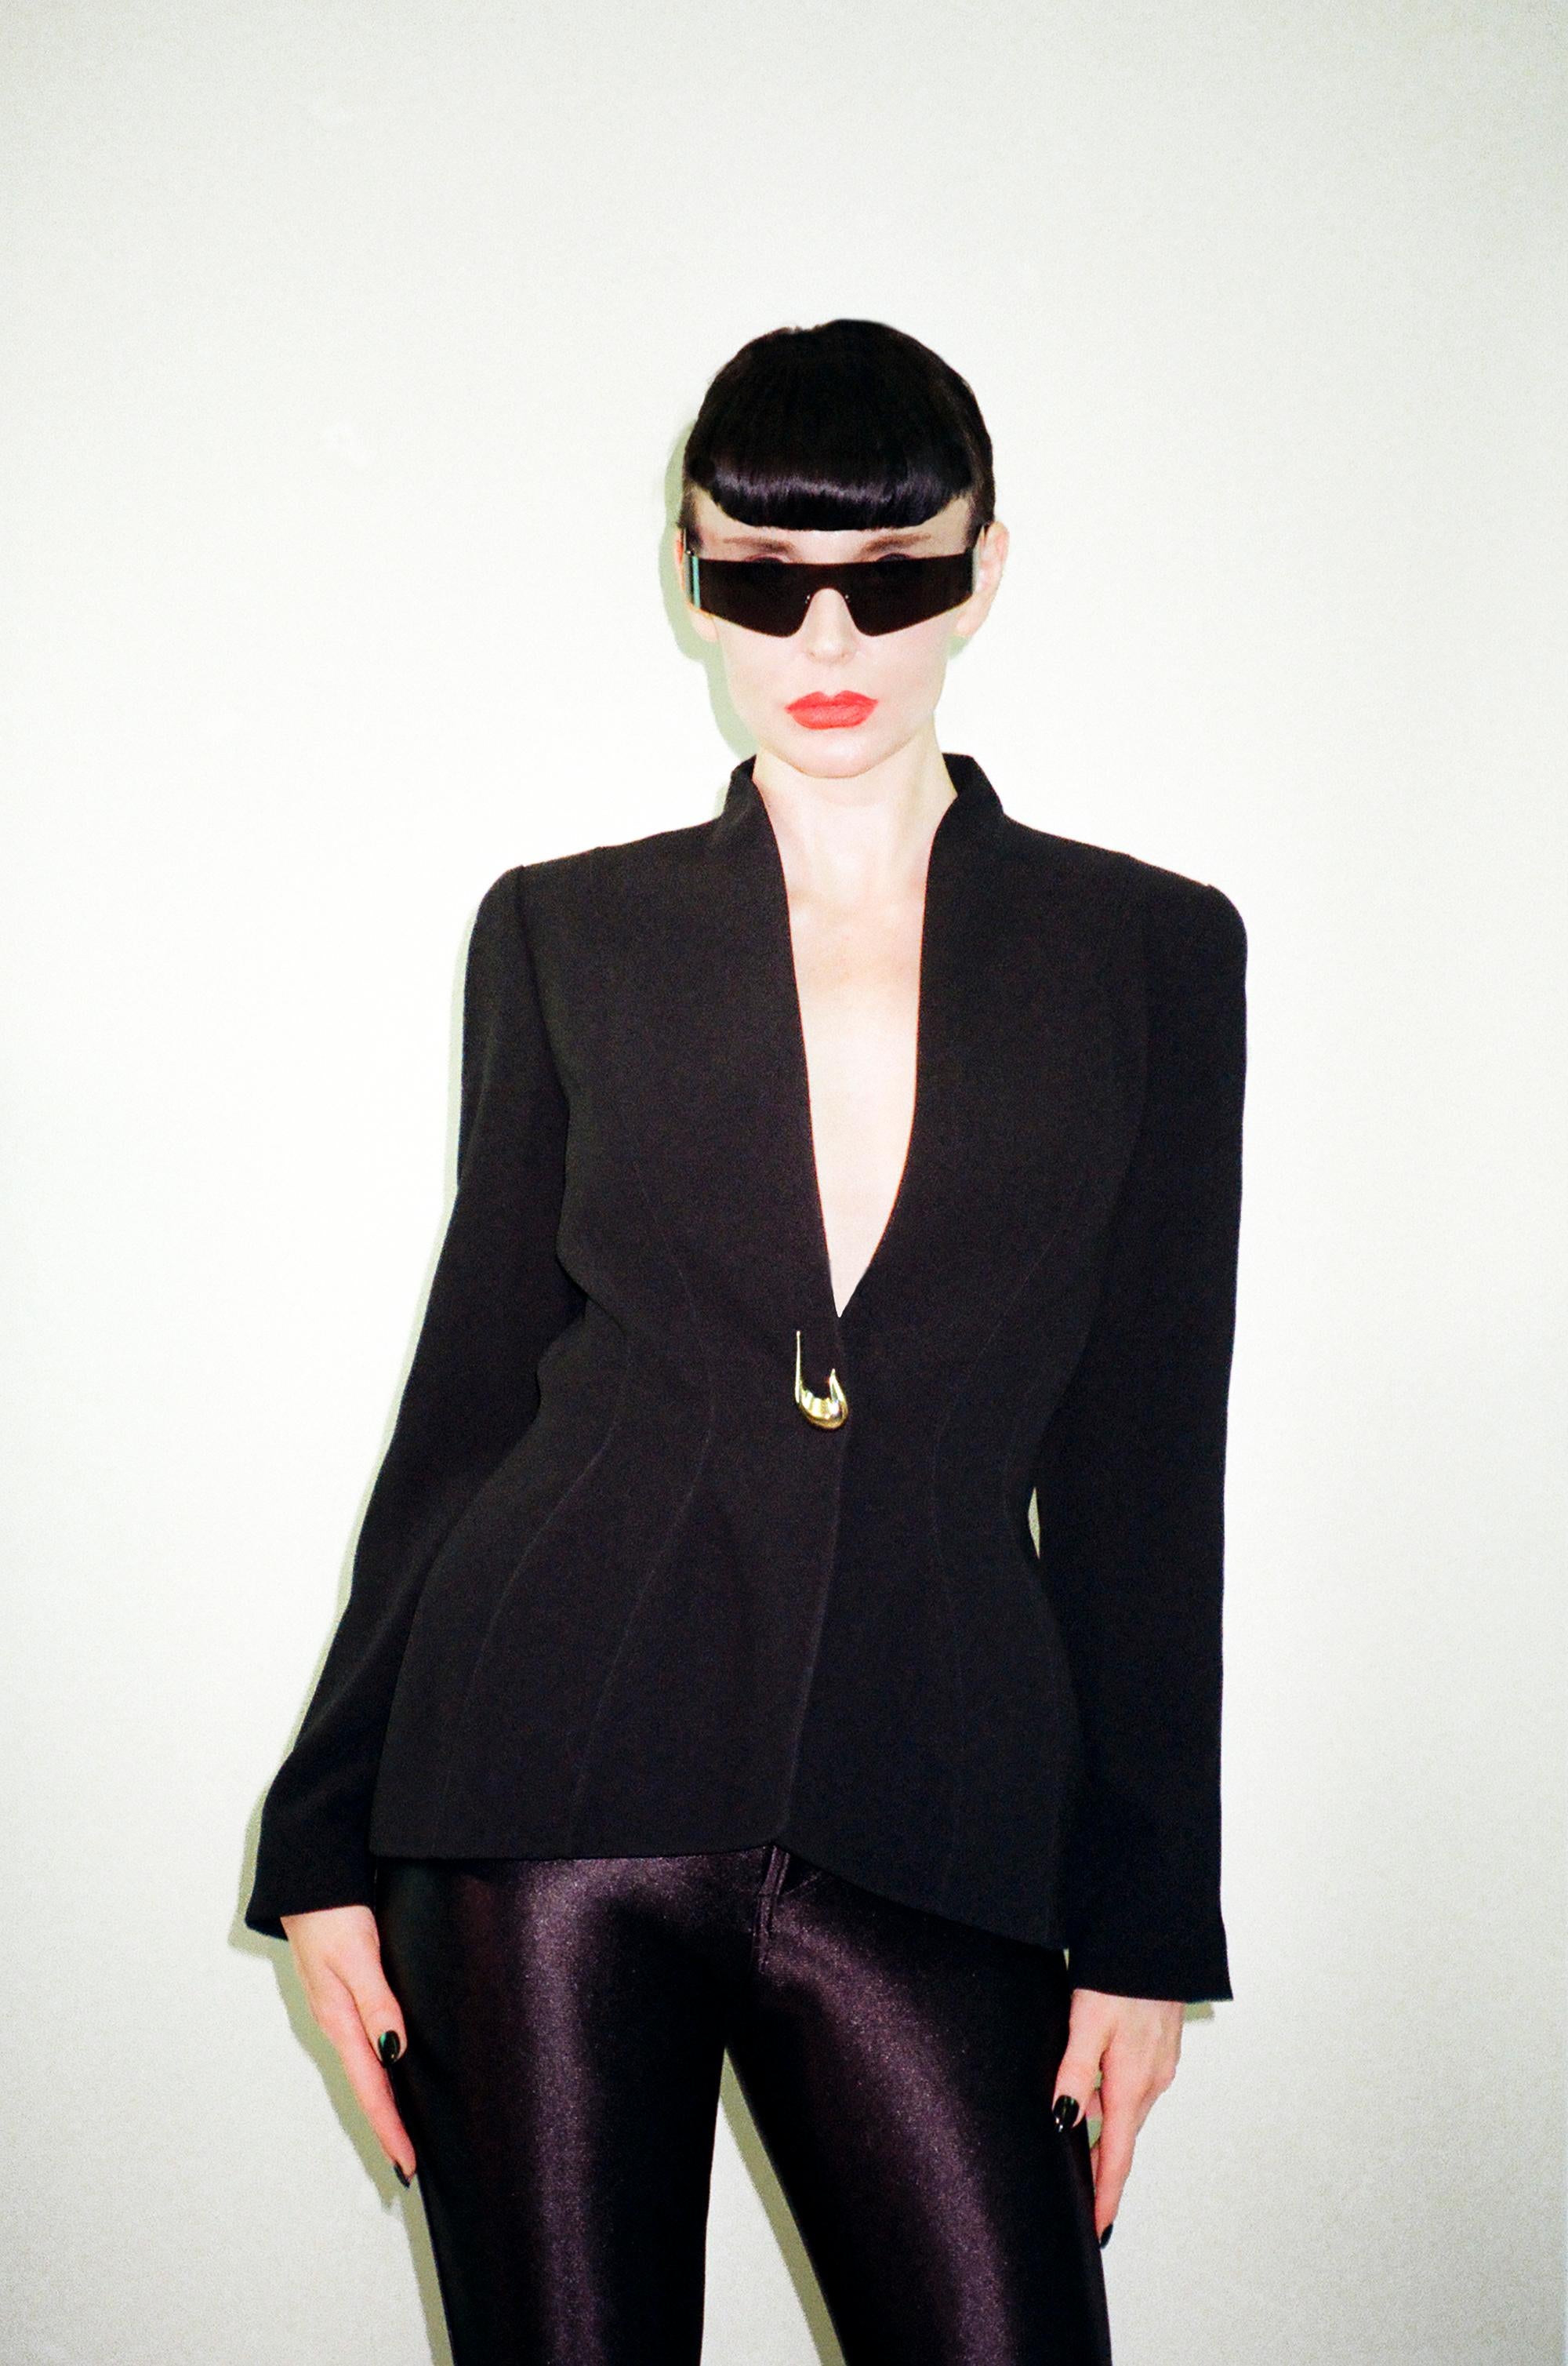 Amazing vintage Thierry Mugler black blazer from collaboration with 3 Suisses le Chouchou from the year 2000.

The 3 Suisses was a mail order company who collaborated with many iconic designers from the 1970s onwards including Thierry Mugler, Jean